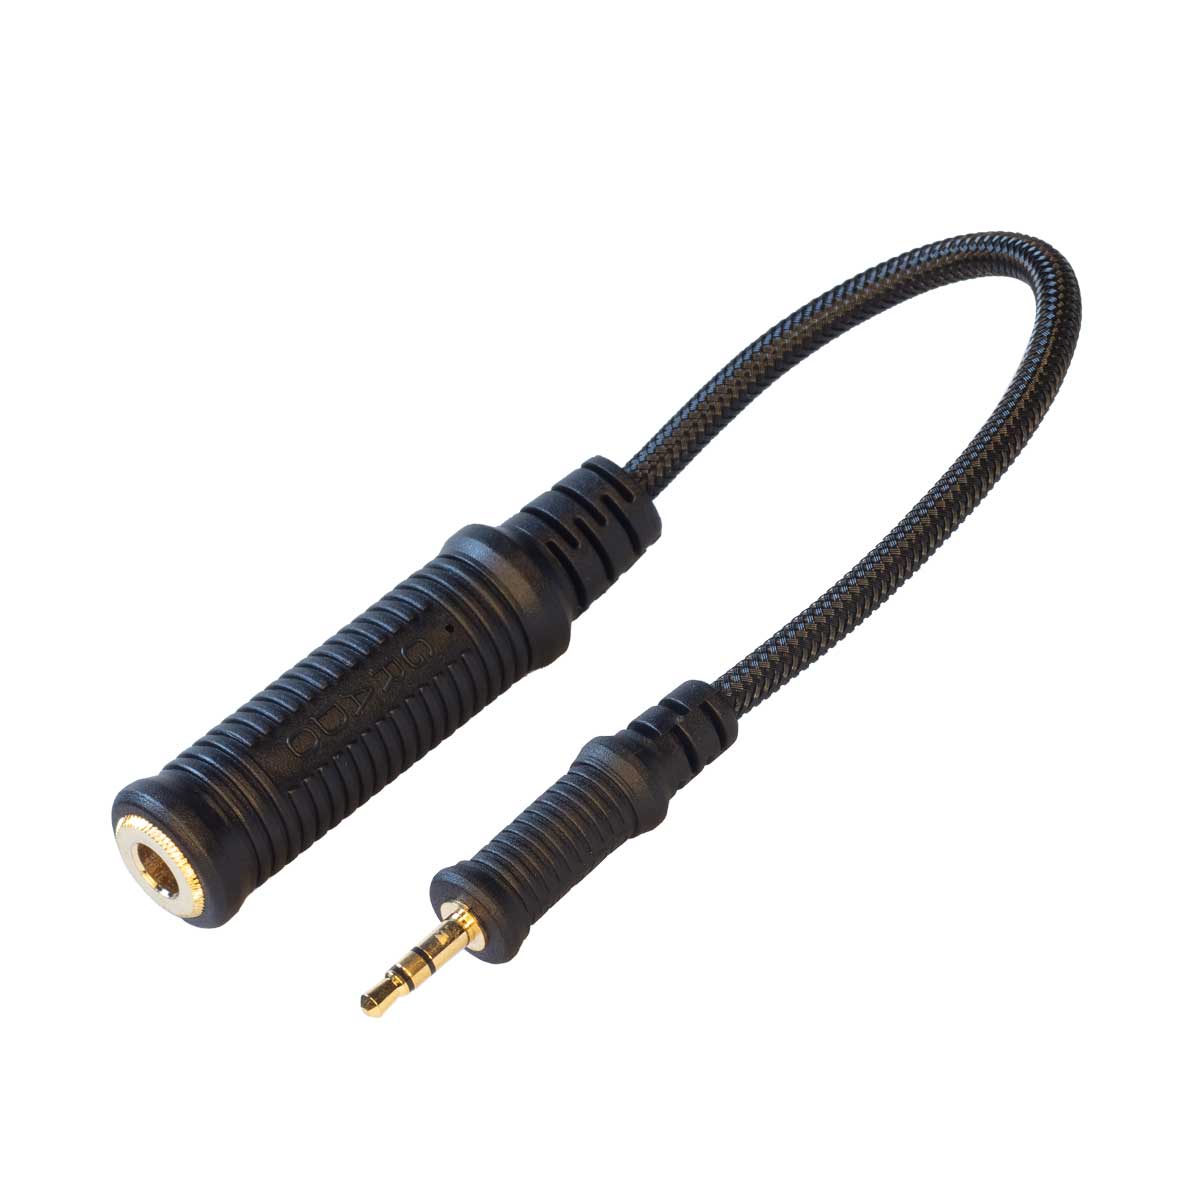 Sennheiser 6.3mm Female to 3.5mm Male Adapter Cable